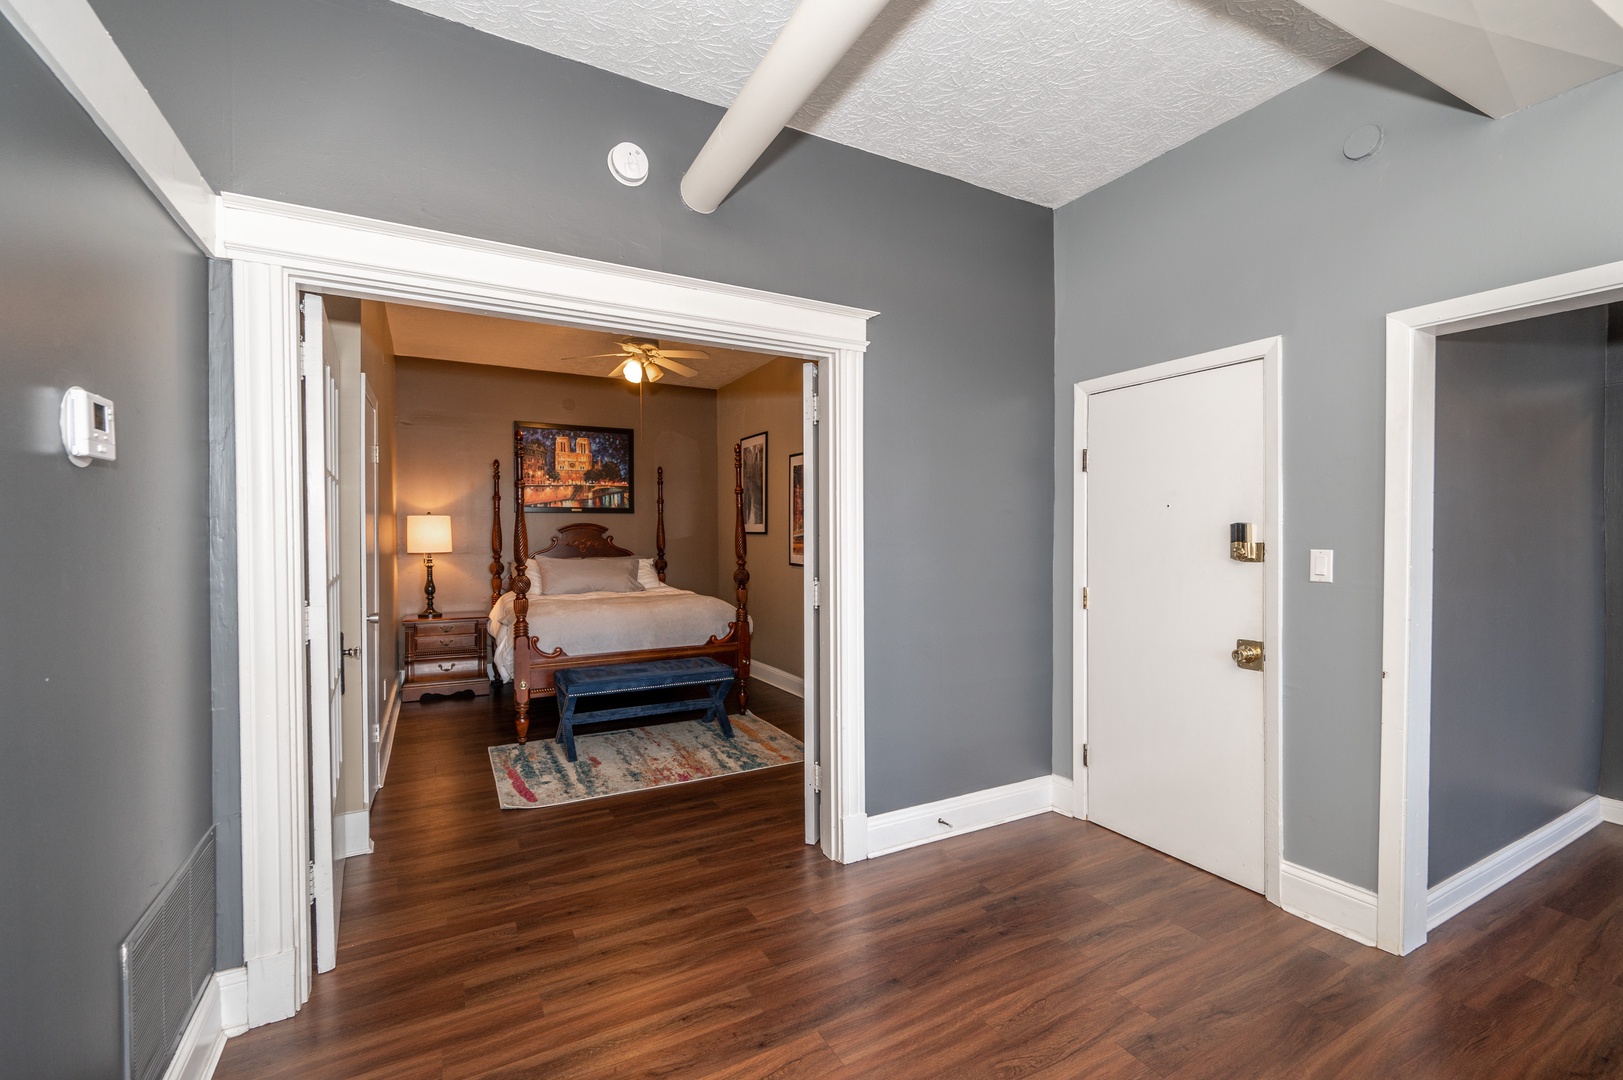 A spacious, open entryway will welcome you home